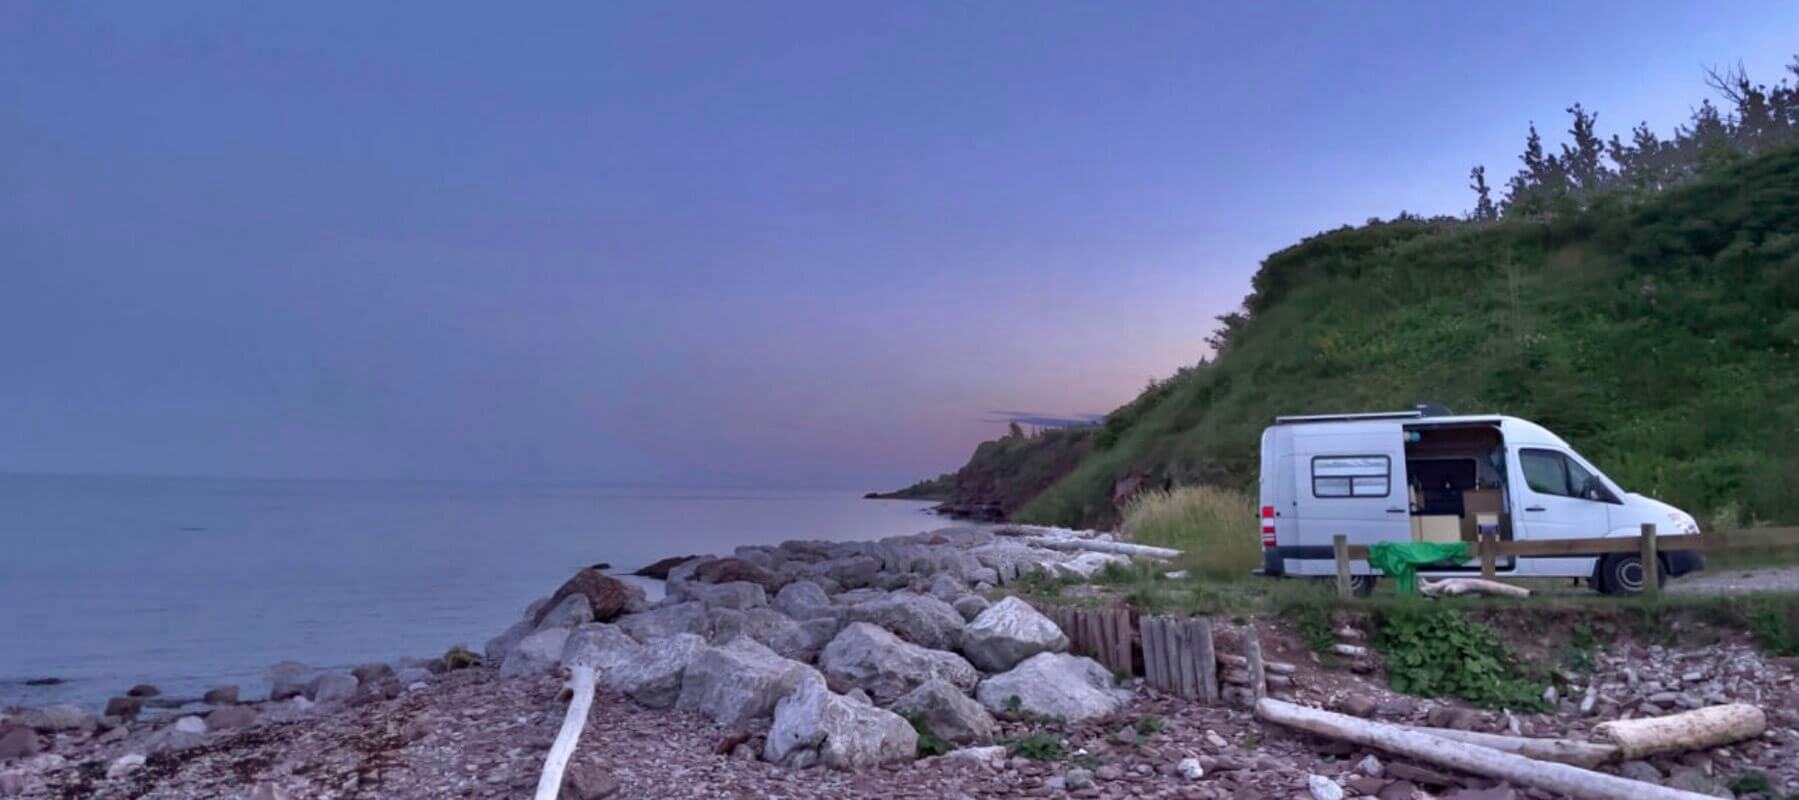 Lonavity van conversion, rental and products, travelling in Quebec, boondocking by the St. Lawrence River, the sunset is beautiful purple and pink, nature is beautiful, love Vanlife